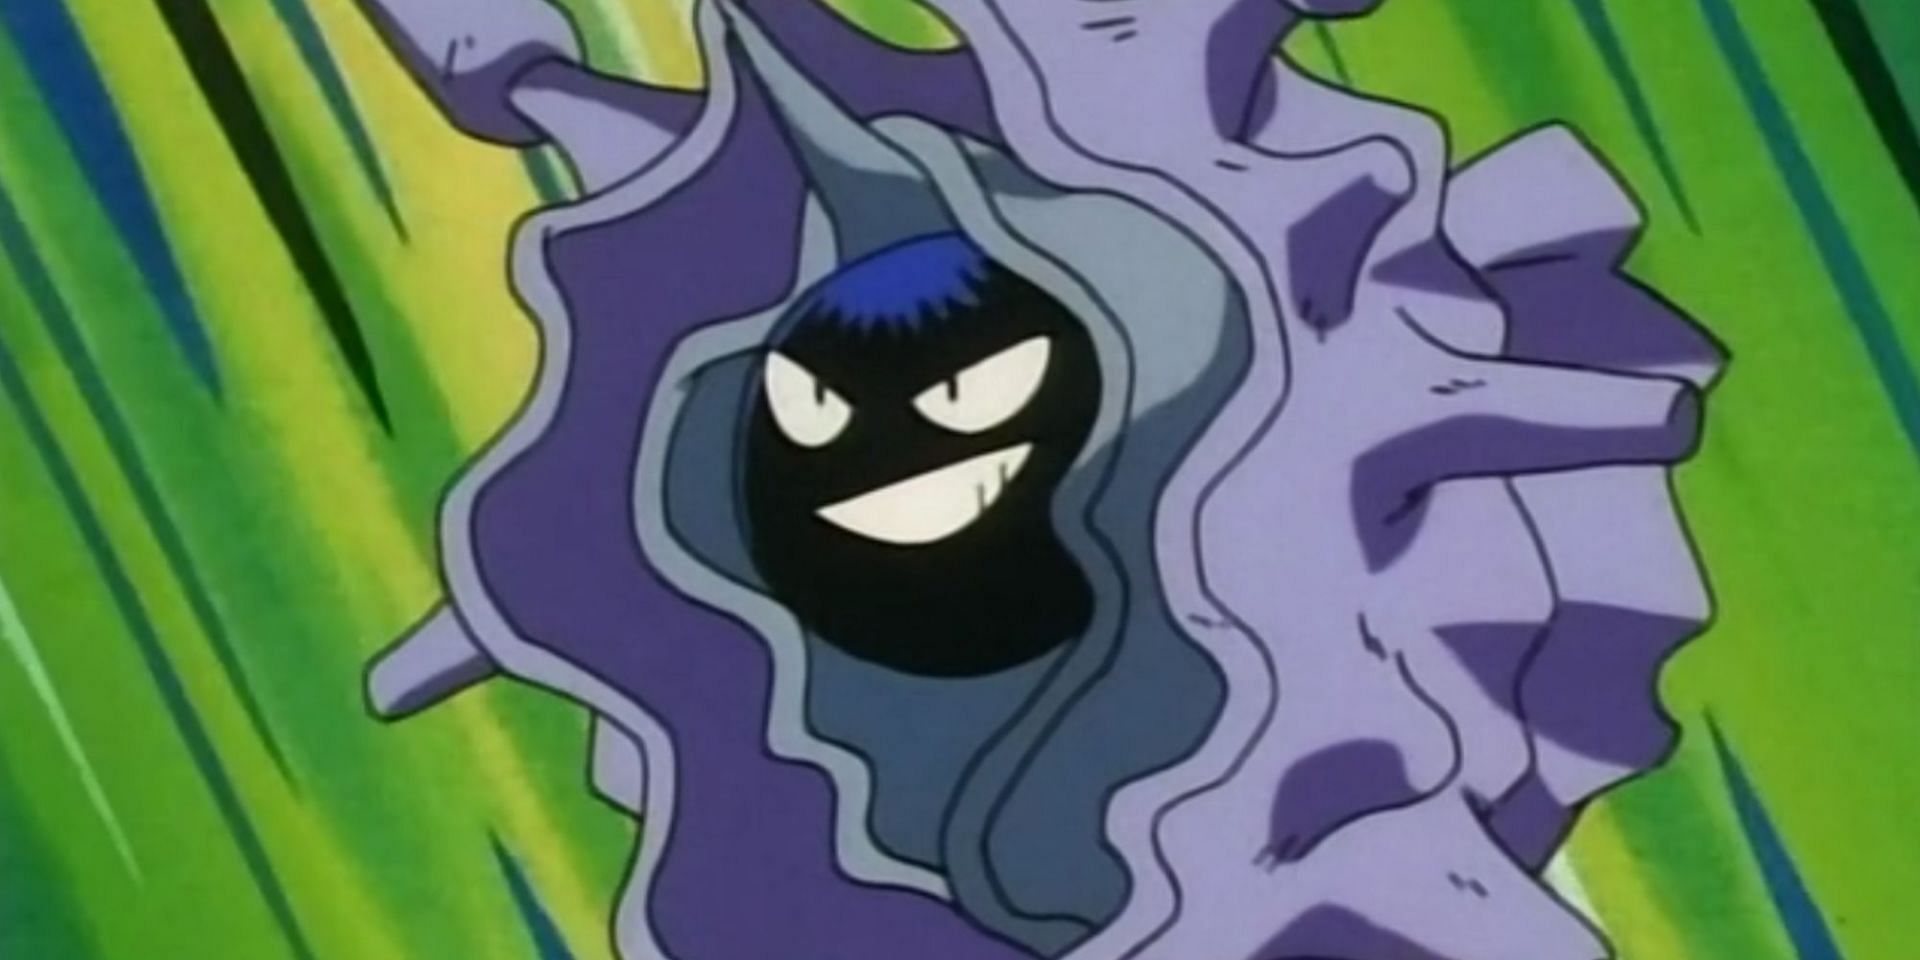 Cloyster in the anime. (Image via The Pokemon Company)